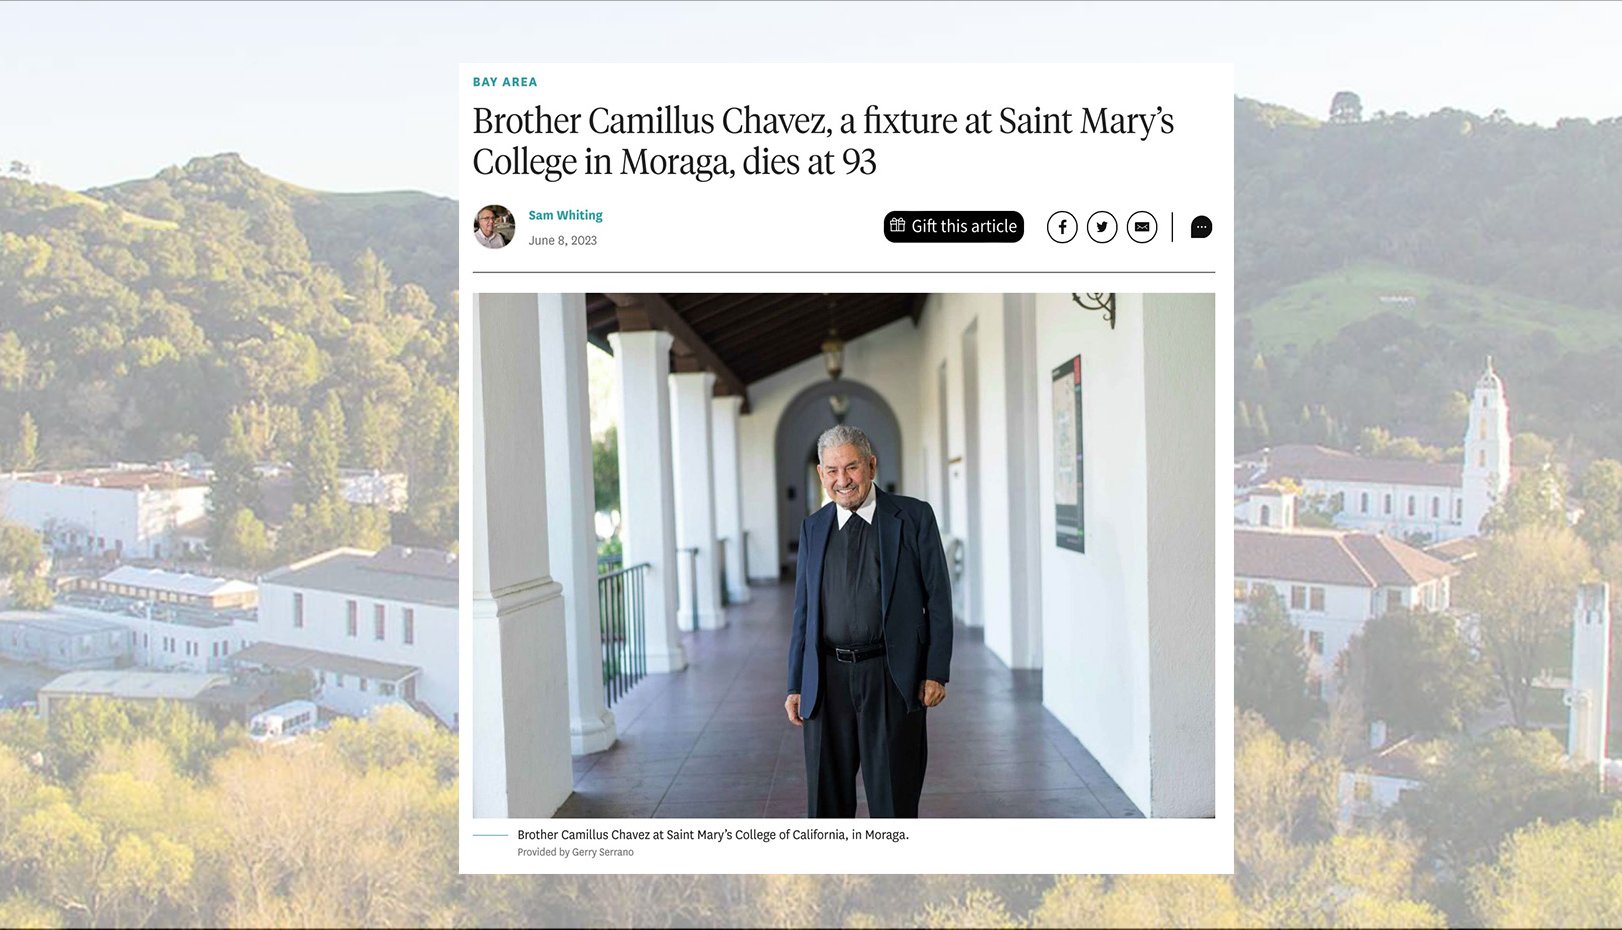 Brother Camillus Chavez obituary in SF Chronicle against a backdrop of the Saint Mary's Campus